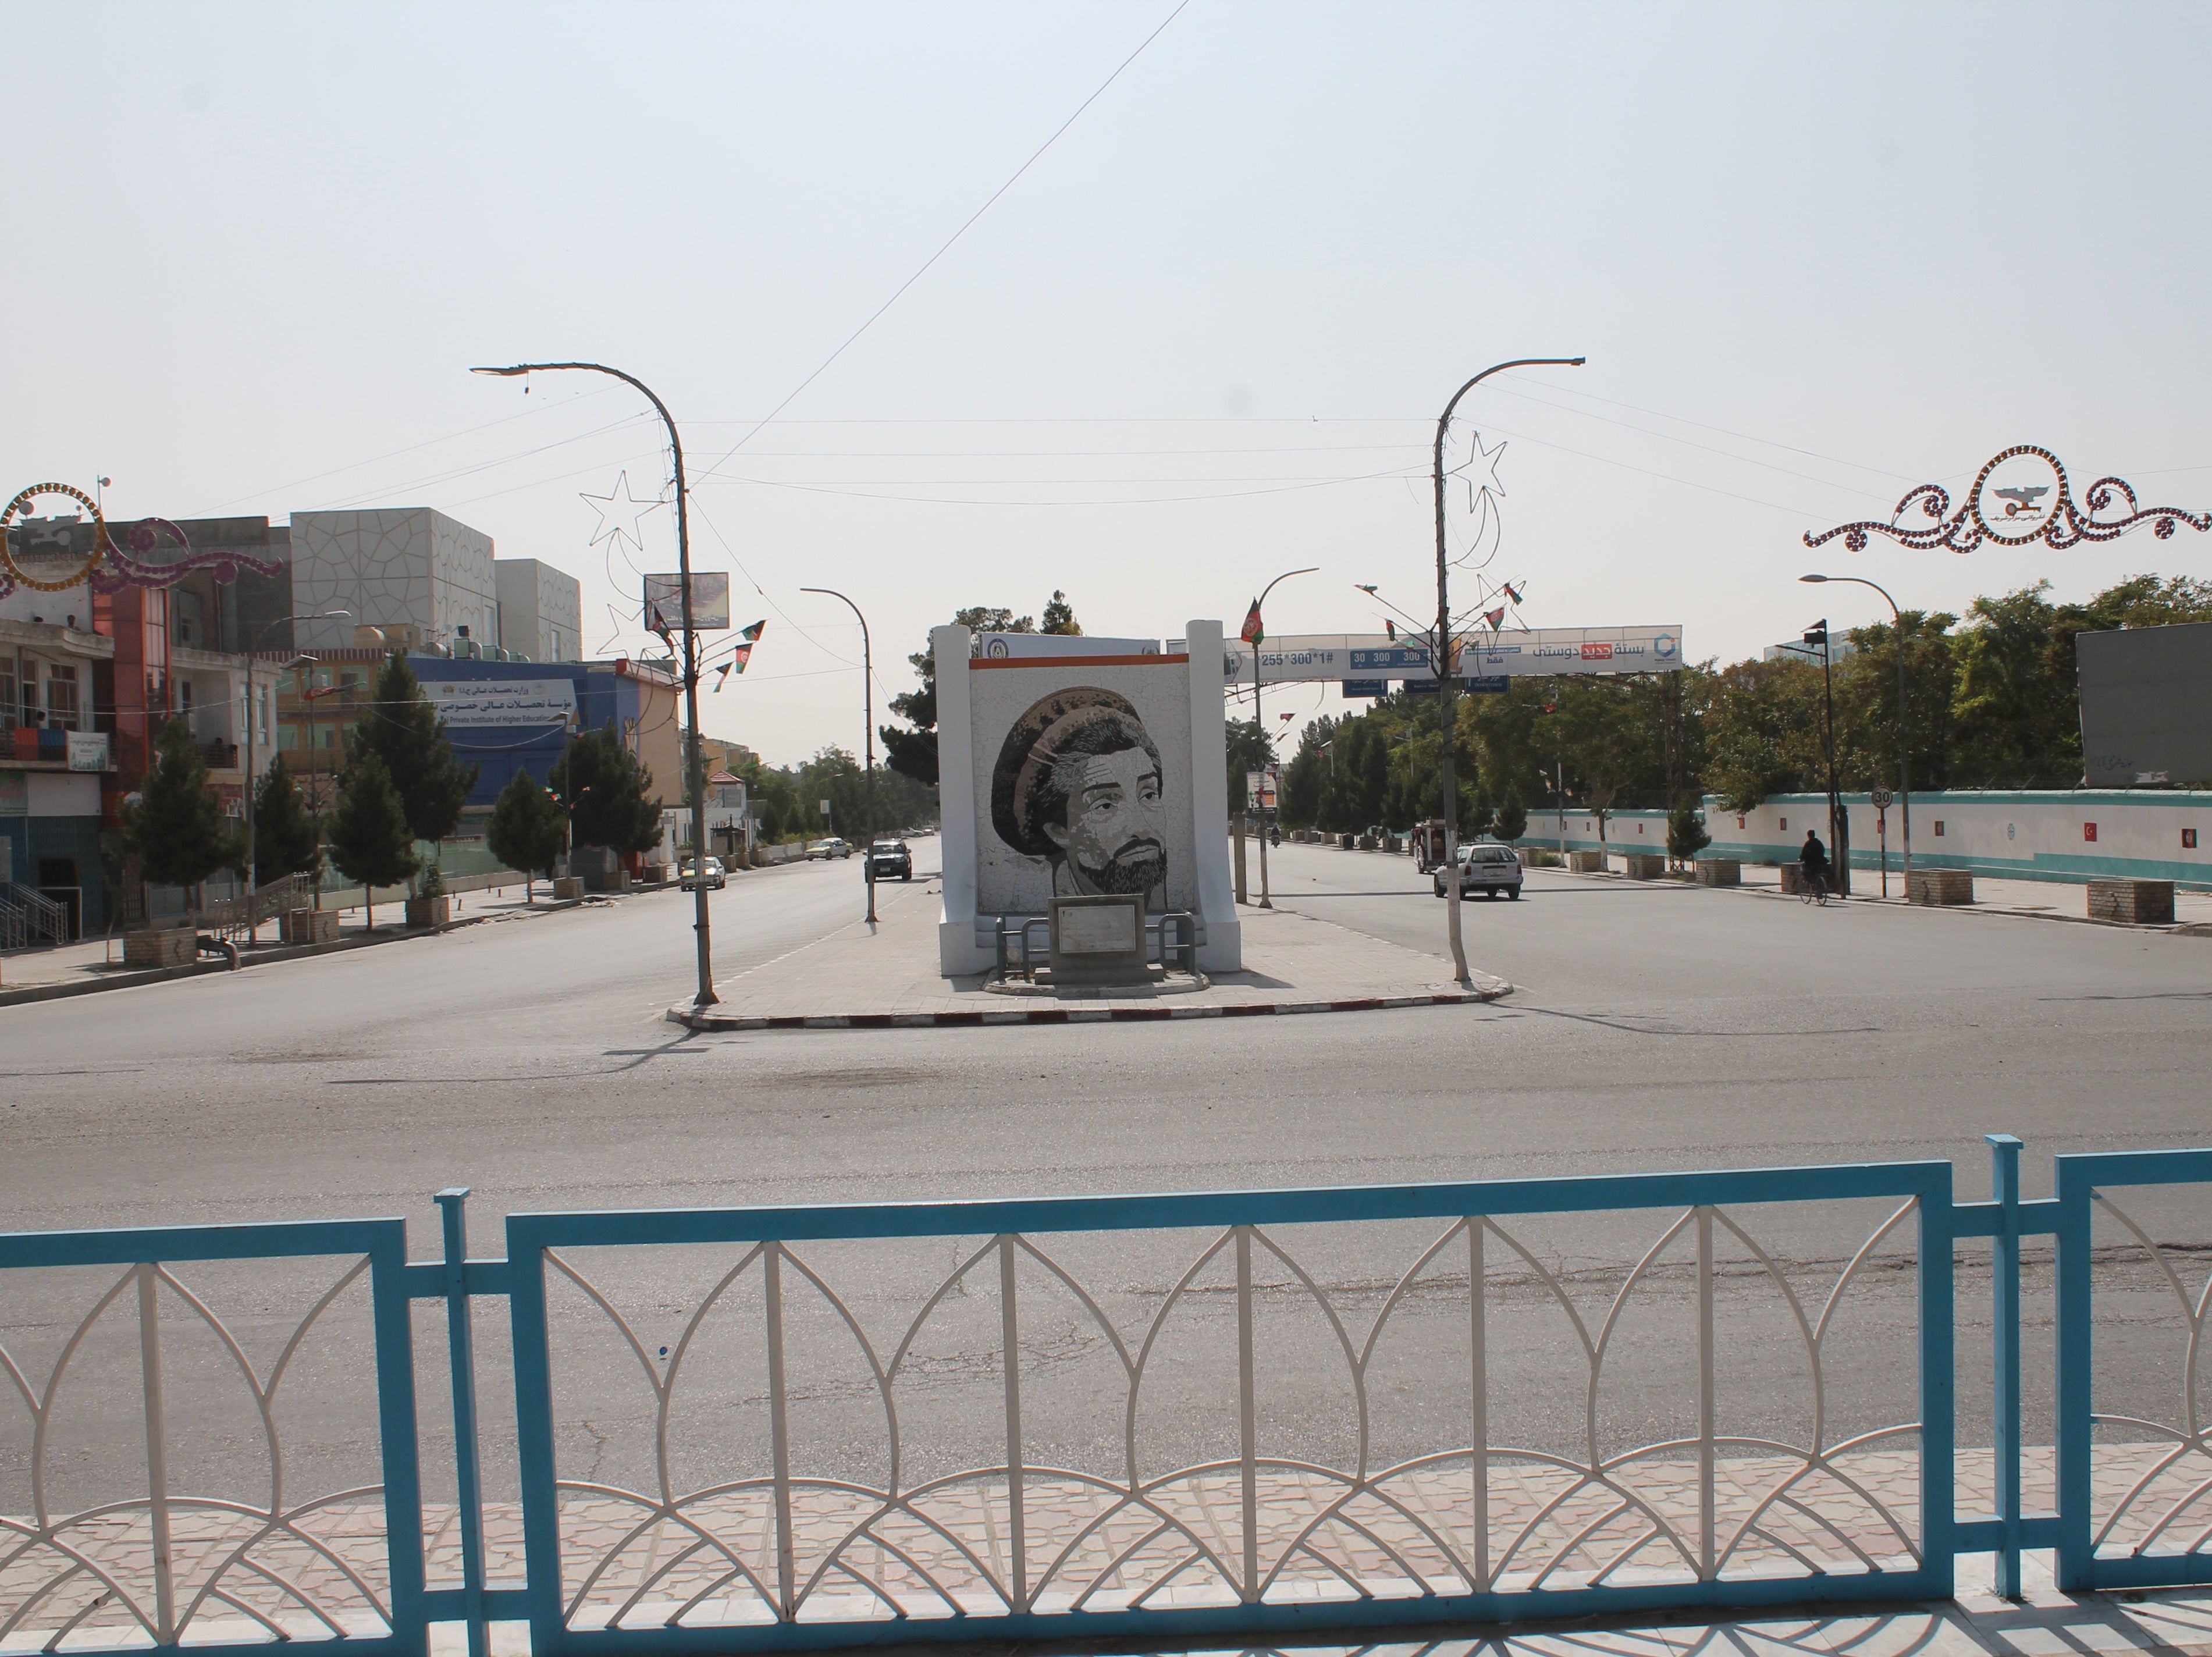 A view of a deserted road showing a monument with image of former Mujahideen commander Ahmad Shah Masood, in Mazar-e-Sharif